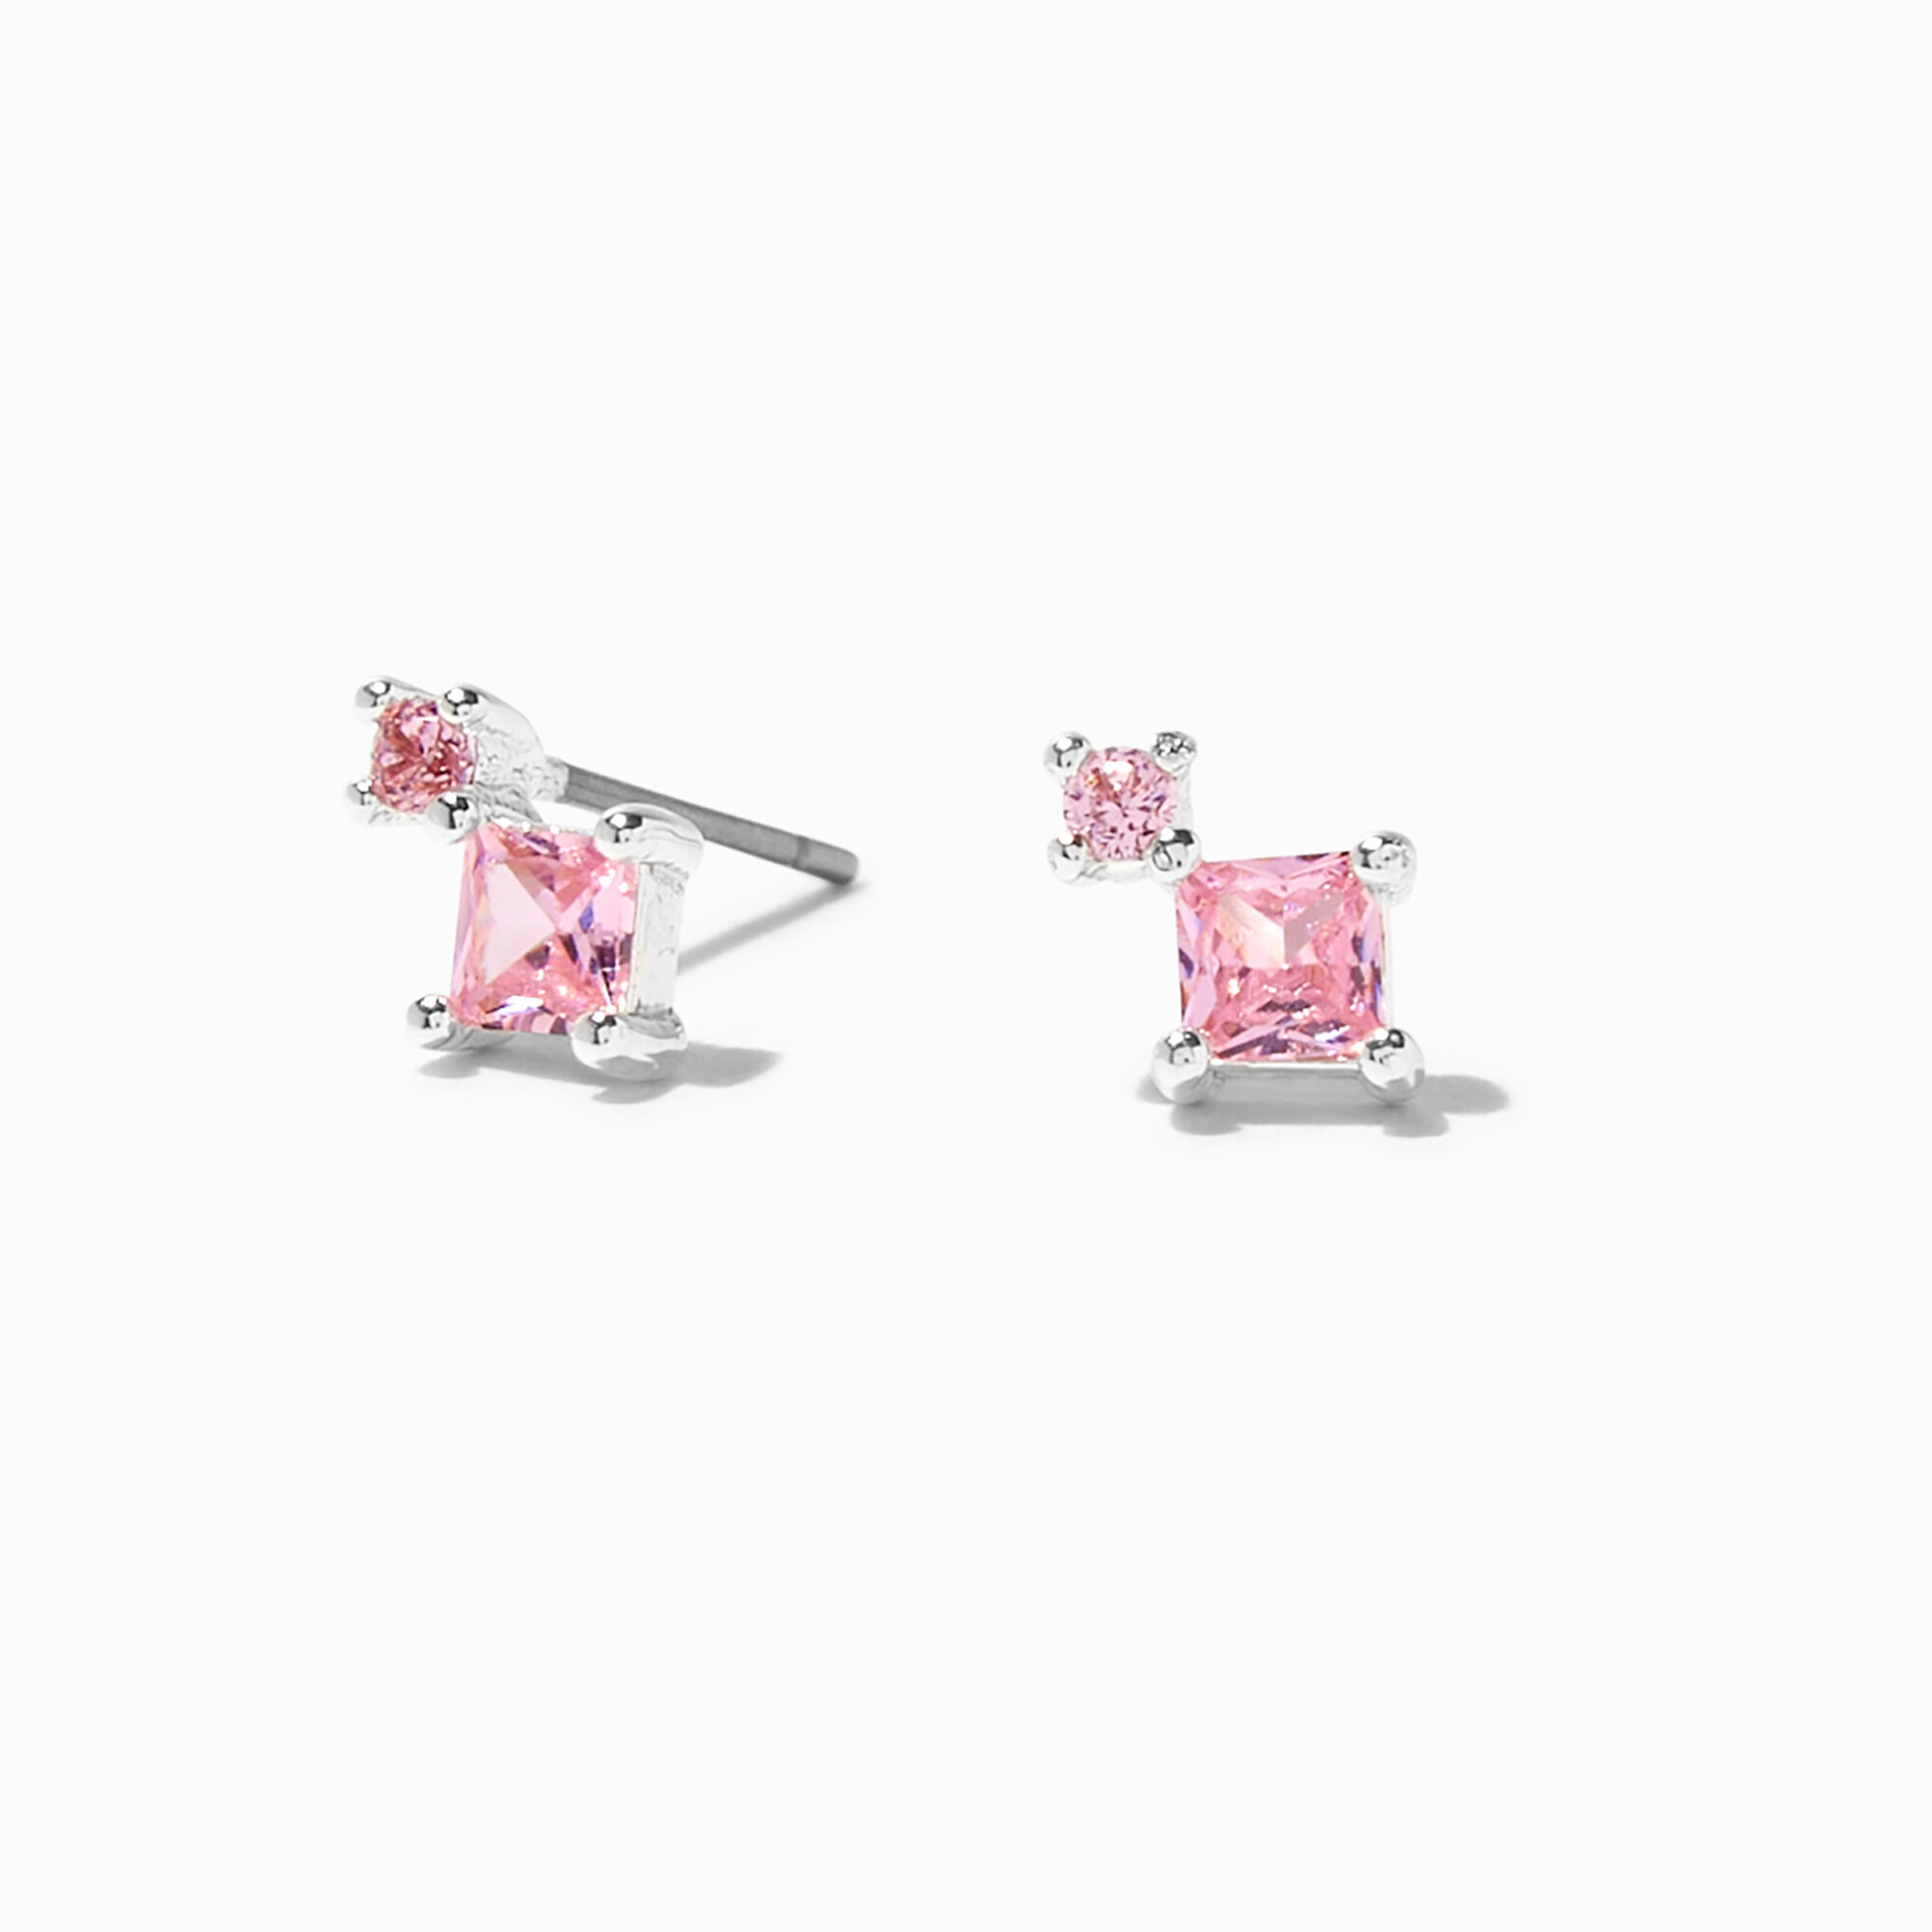 View Claires 5MM Cubic Zirconia Geometric Stud Earrings Pink information